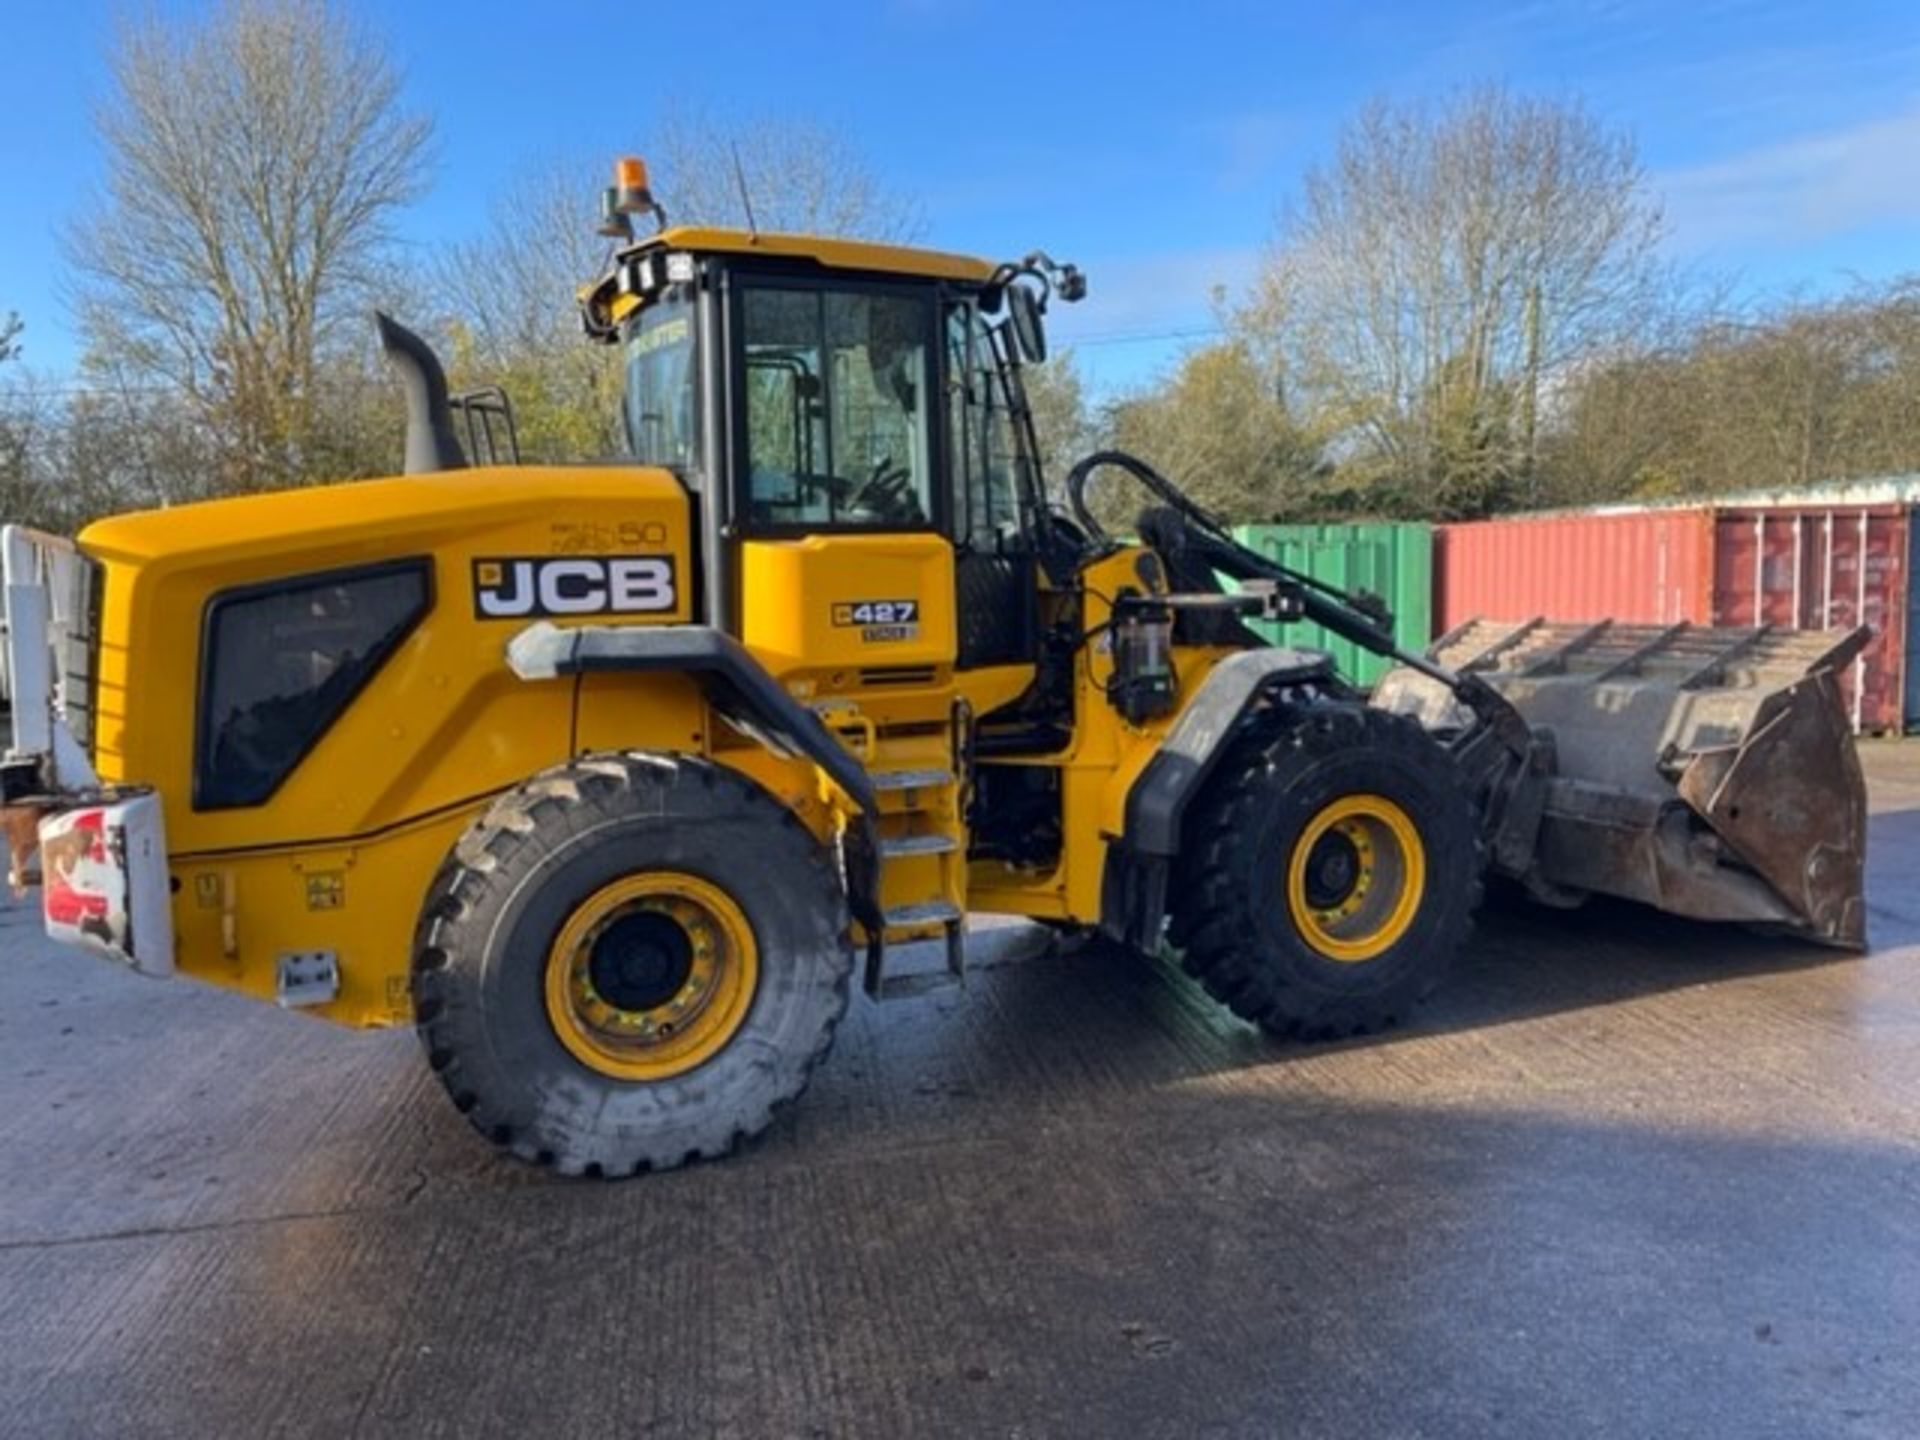 JCB, Wastemaster 427 S5, wheel loader, PIN: JCB4A5A9VK2679908 (2019), Last known Hours 3775.8, - Image 2 of 24